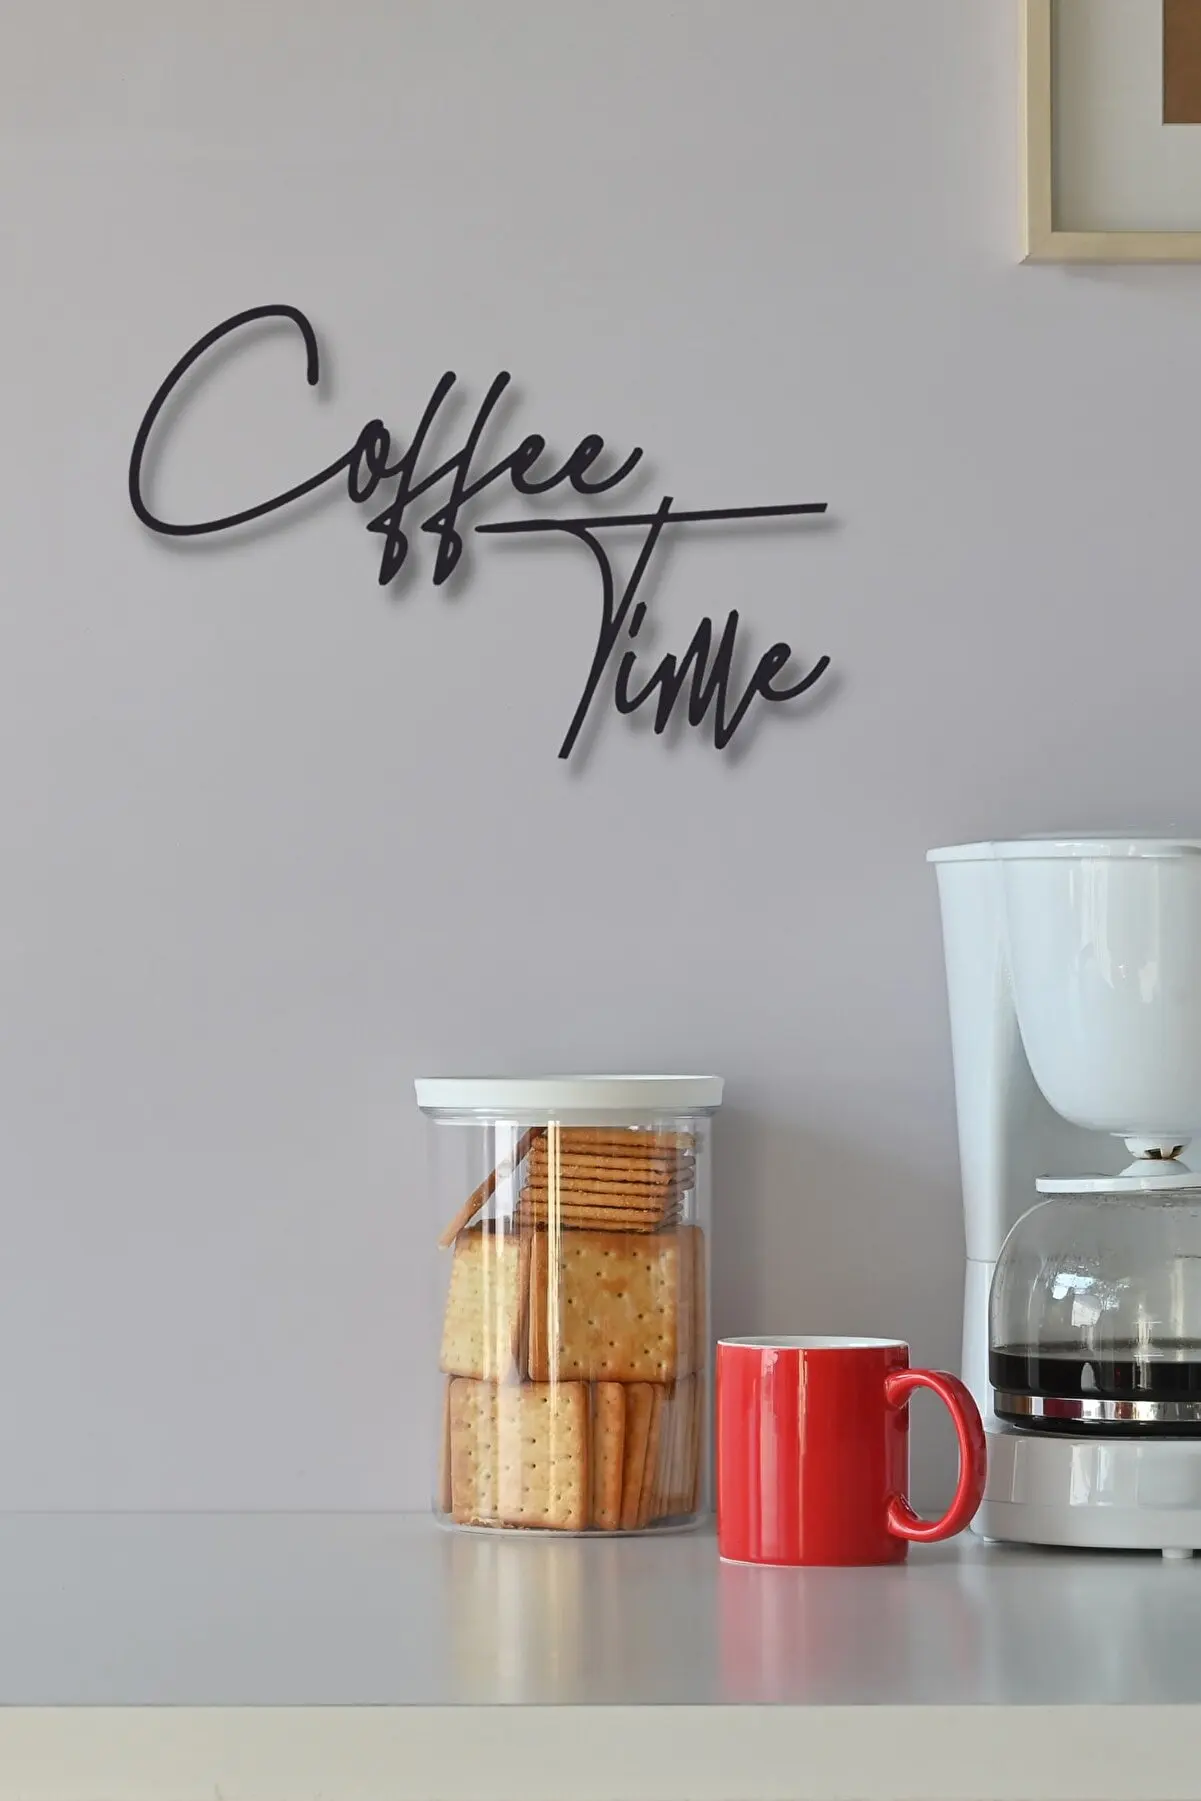 

Black Wood Coffee Time Coffee Time Wall Art Lettering Wall Decor For Kitchen Cafe 45x30 cm Painting Gift Home Office